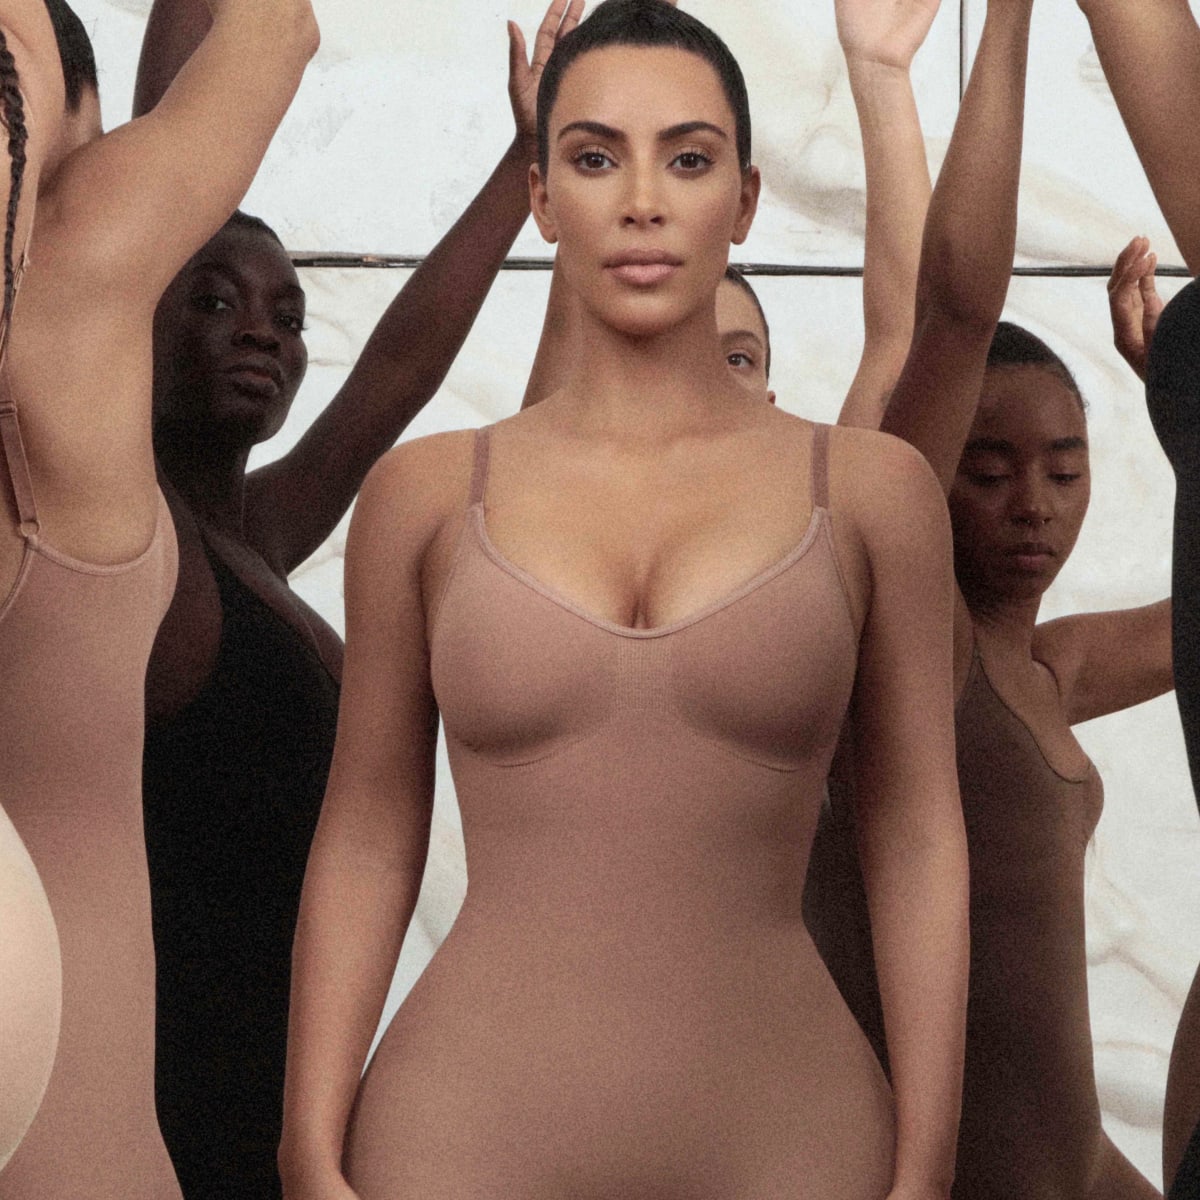 Kim Kardashian's Skims doubles valuation to $3.2 bln after latest fundraise